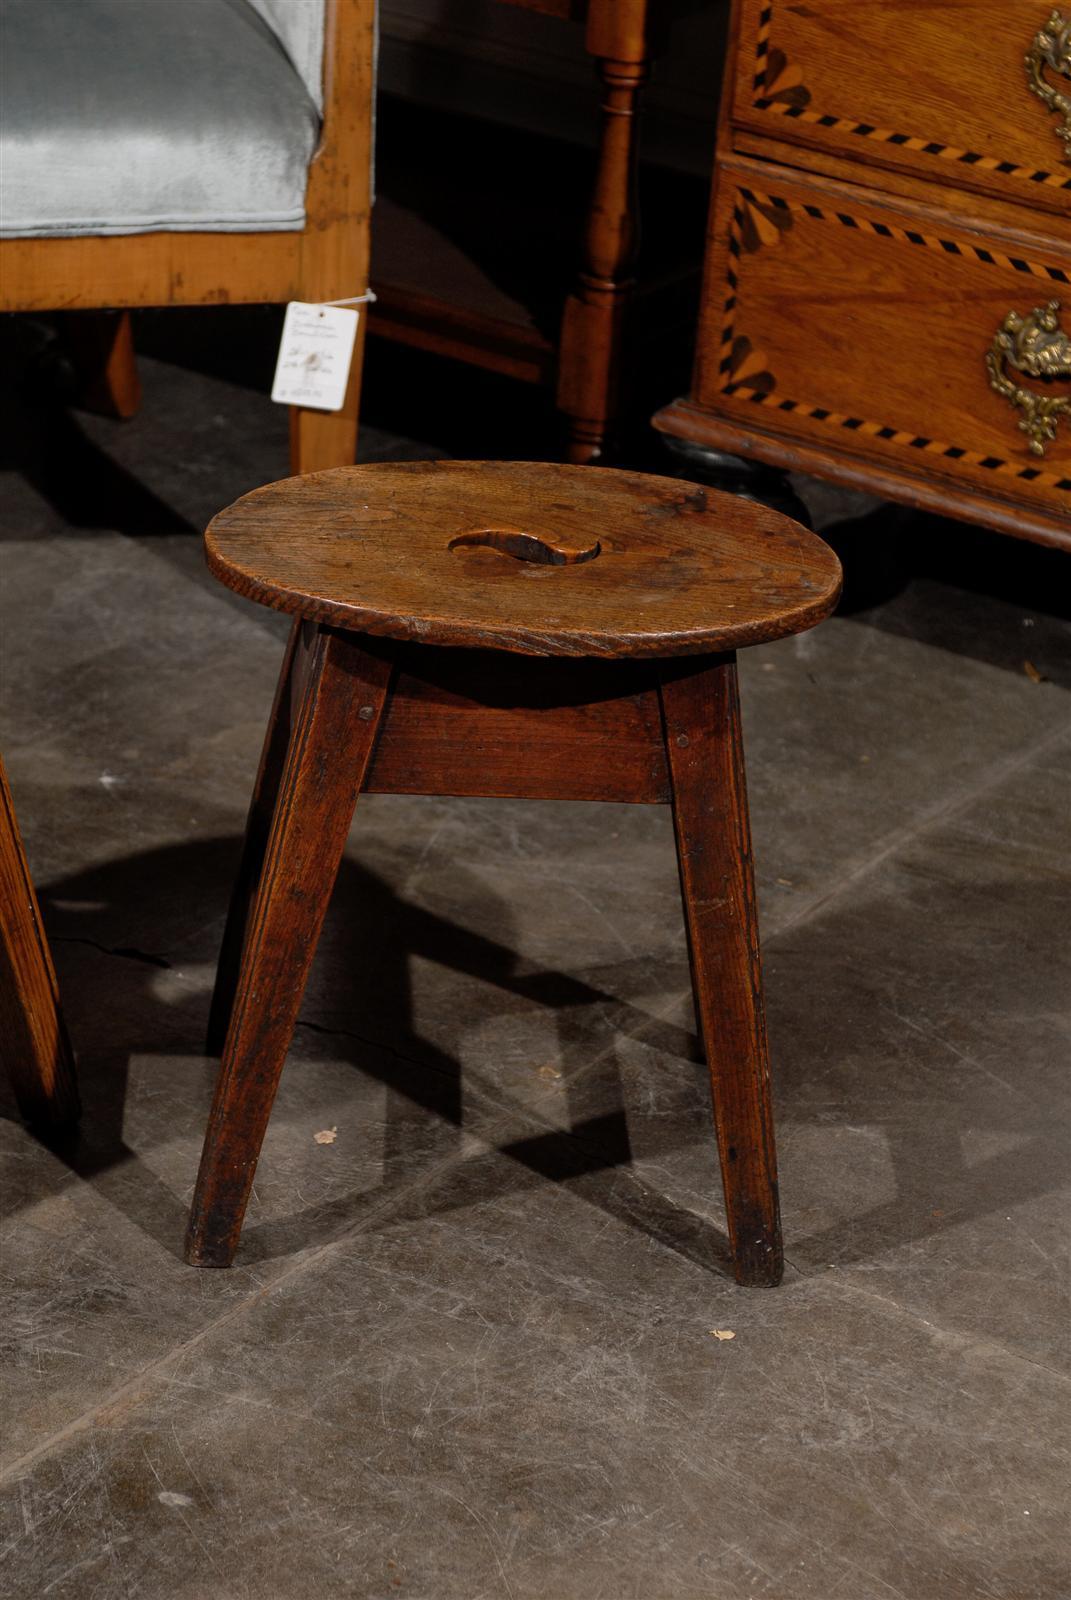 19th Century English Oval Top Oak Stool with Splayed Legs and Side Stretcher, circa 1880